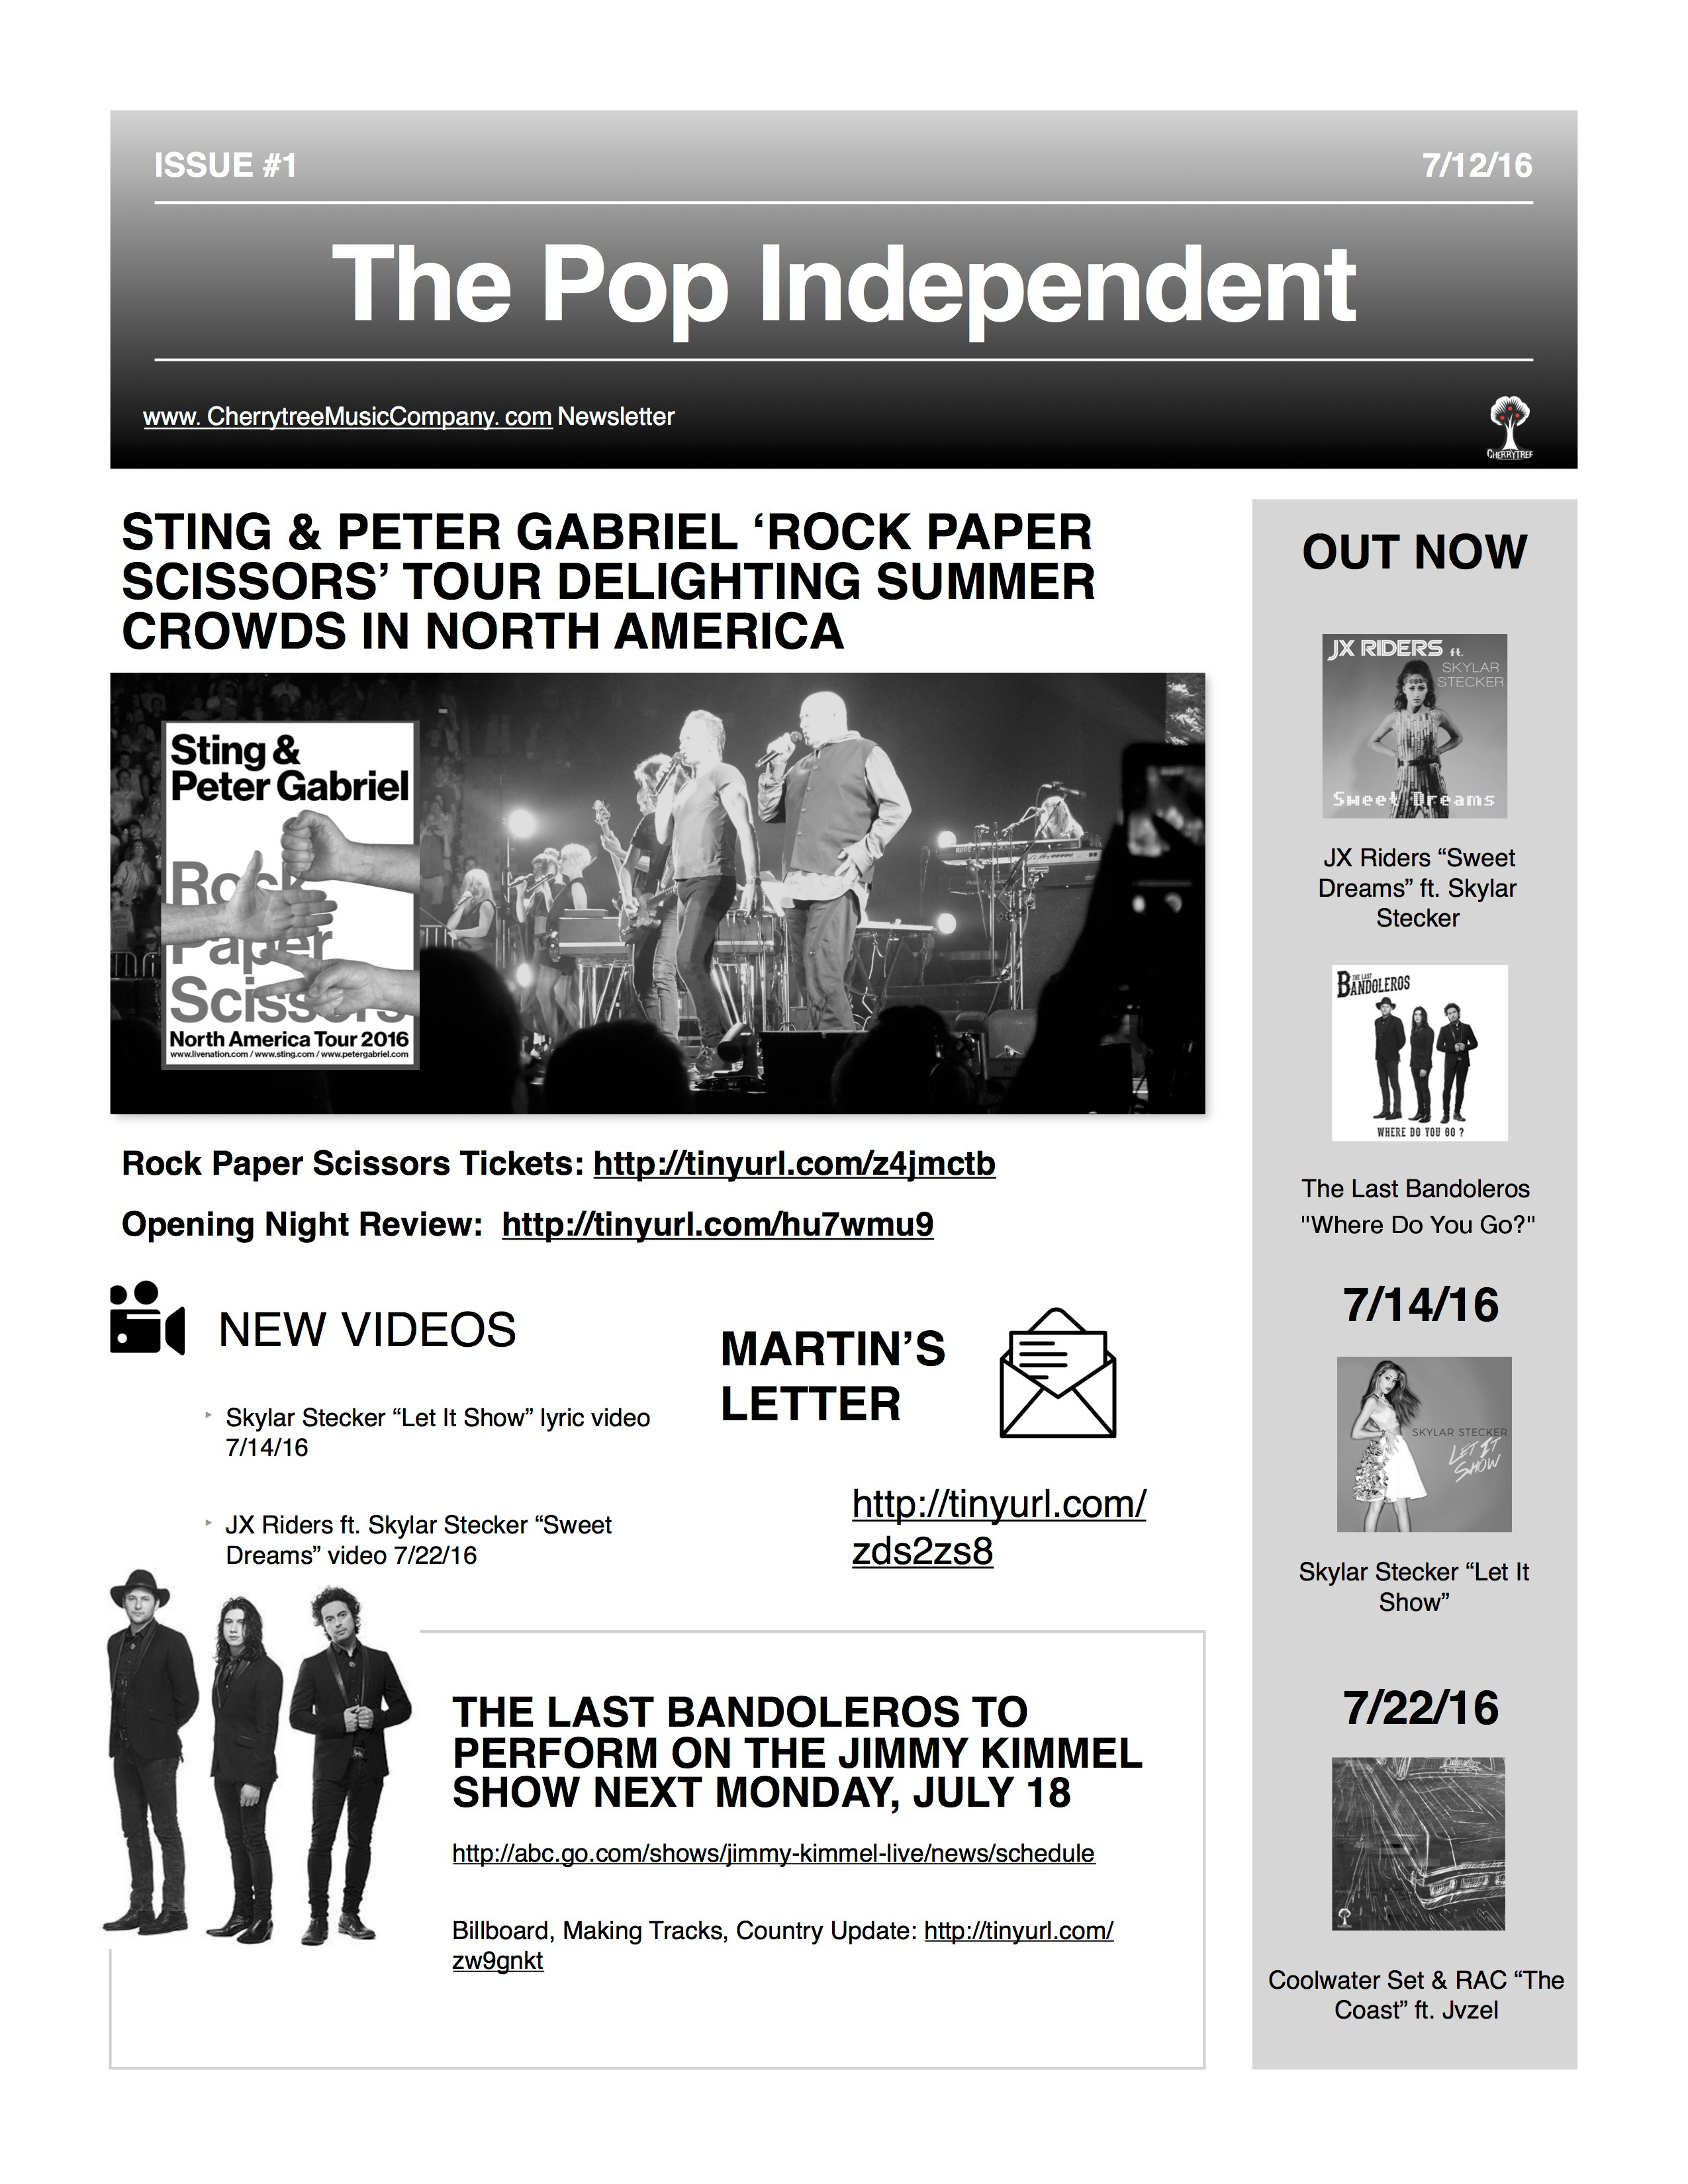 The Pop Independent, issue 1